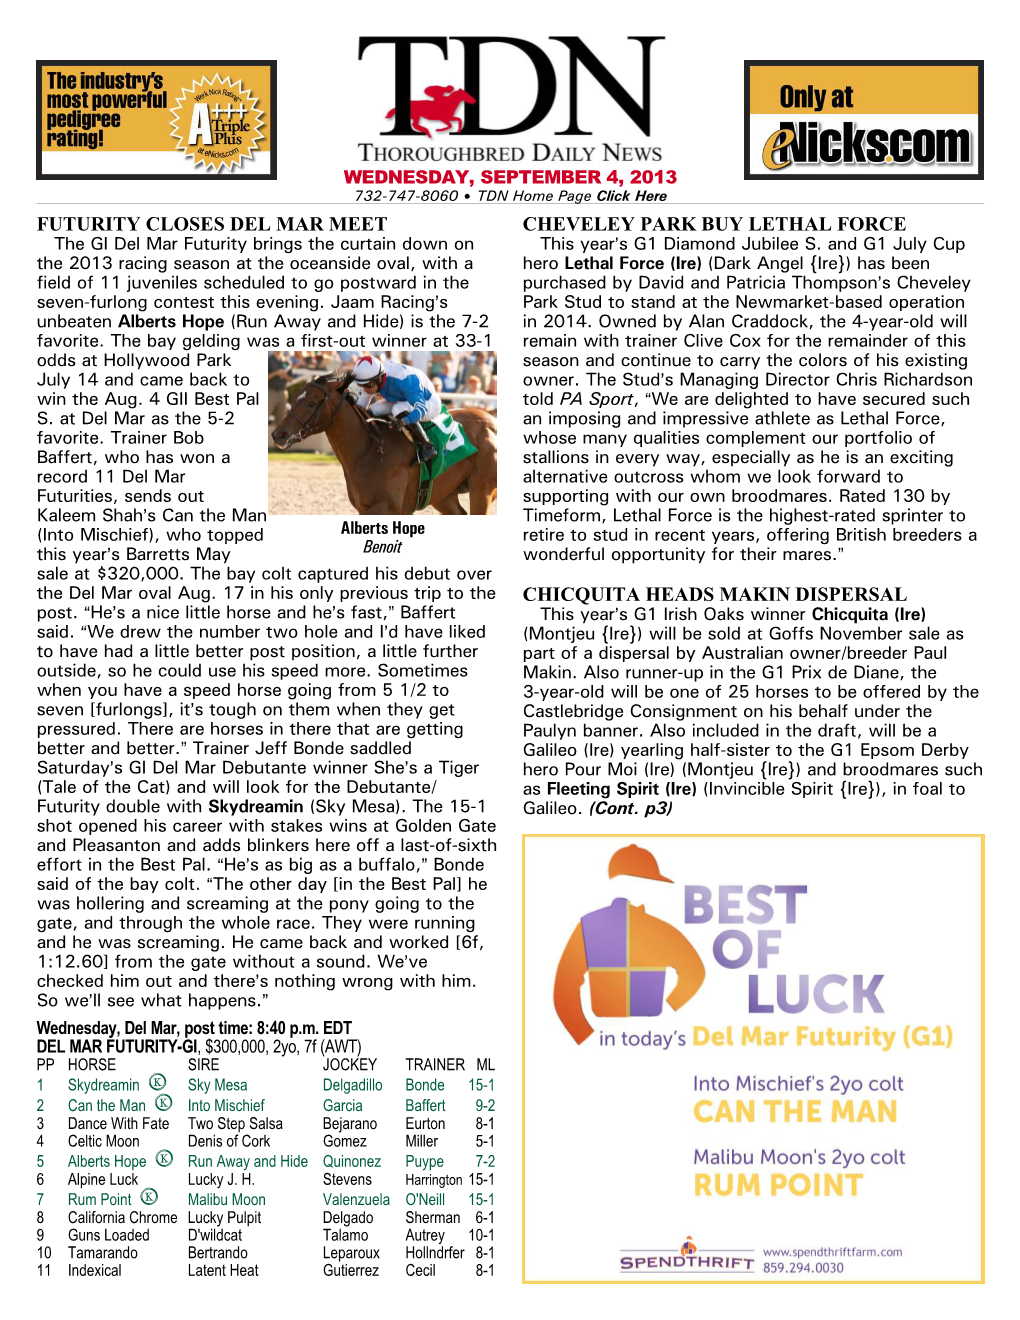 Futurity Closes Del Mar Meet Cheveley Park Buy Lethal Force Chicquita Heads Makin Dispersal